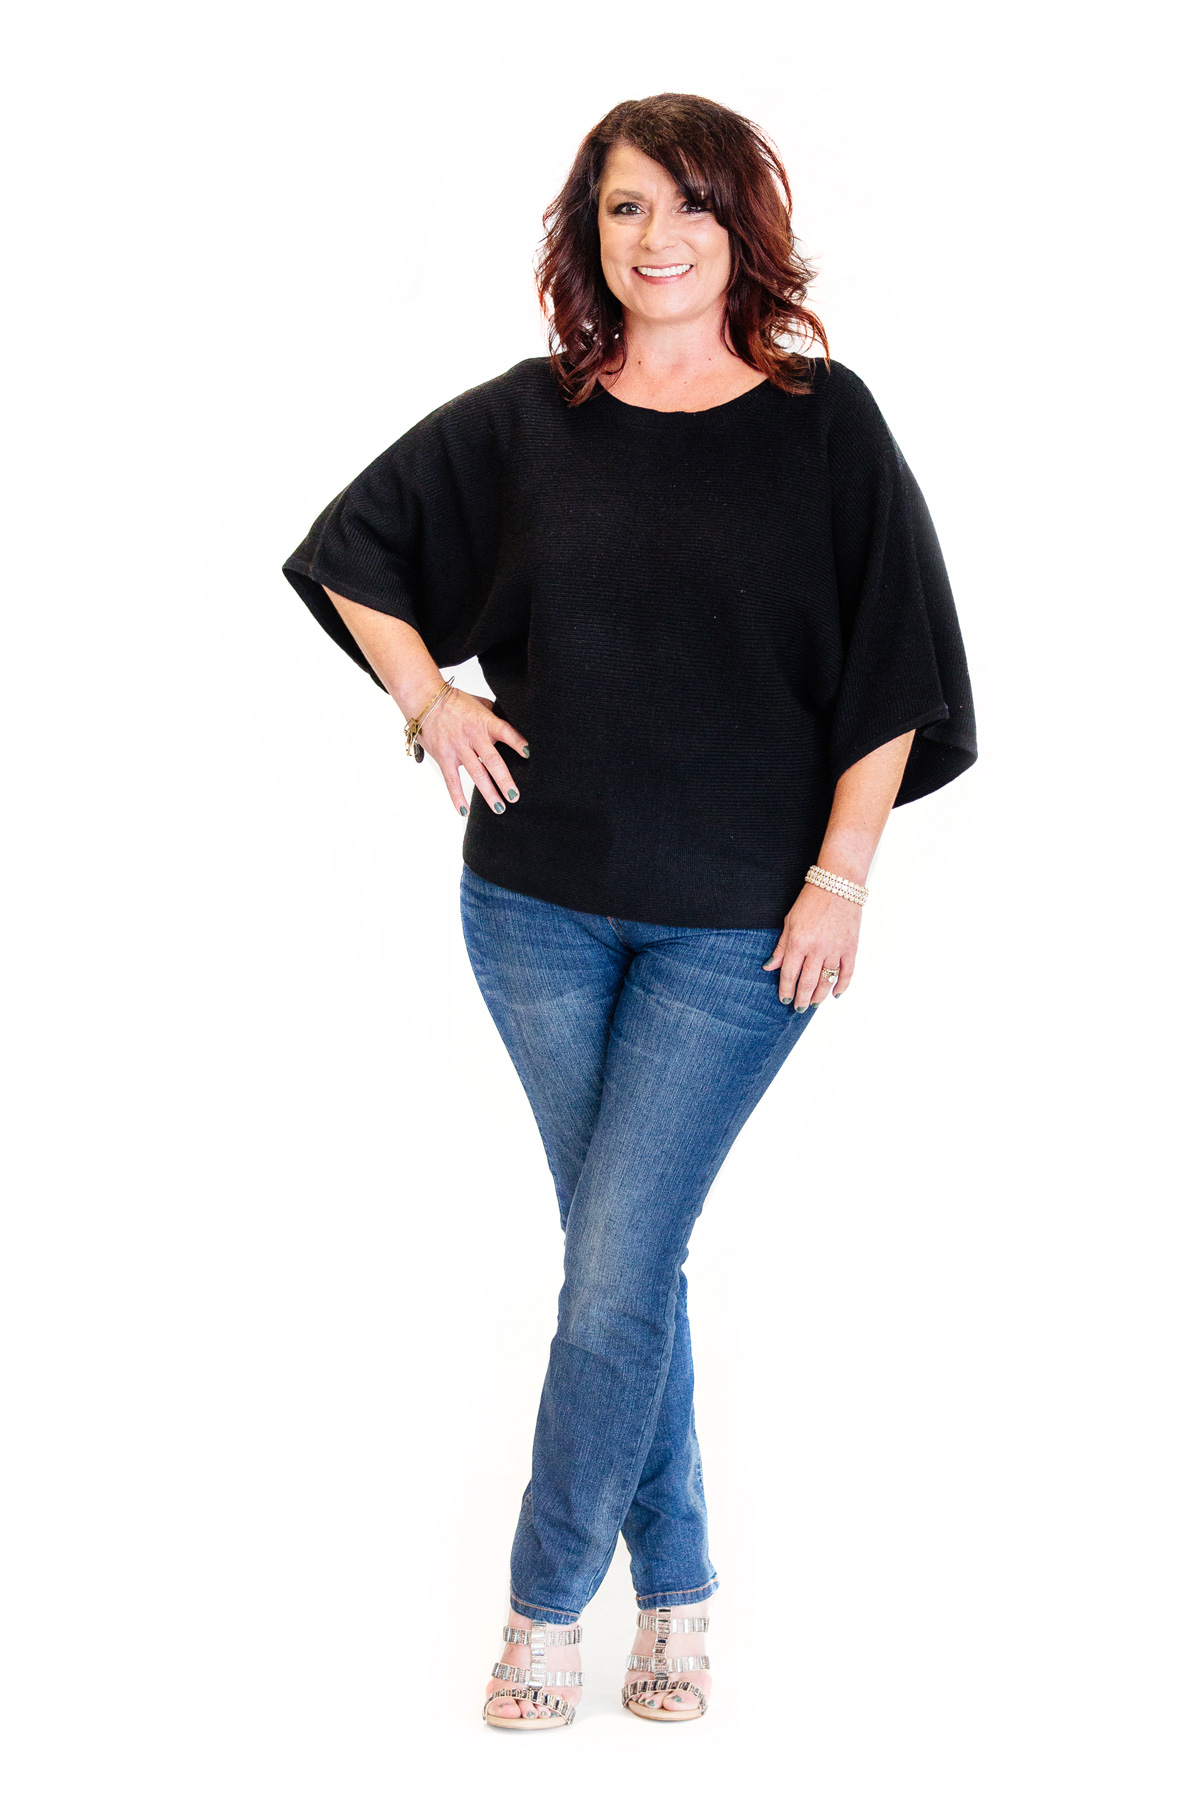 Chelsie, B105 radio personality, wearing jeans and a black top.